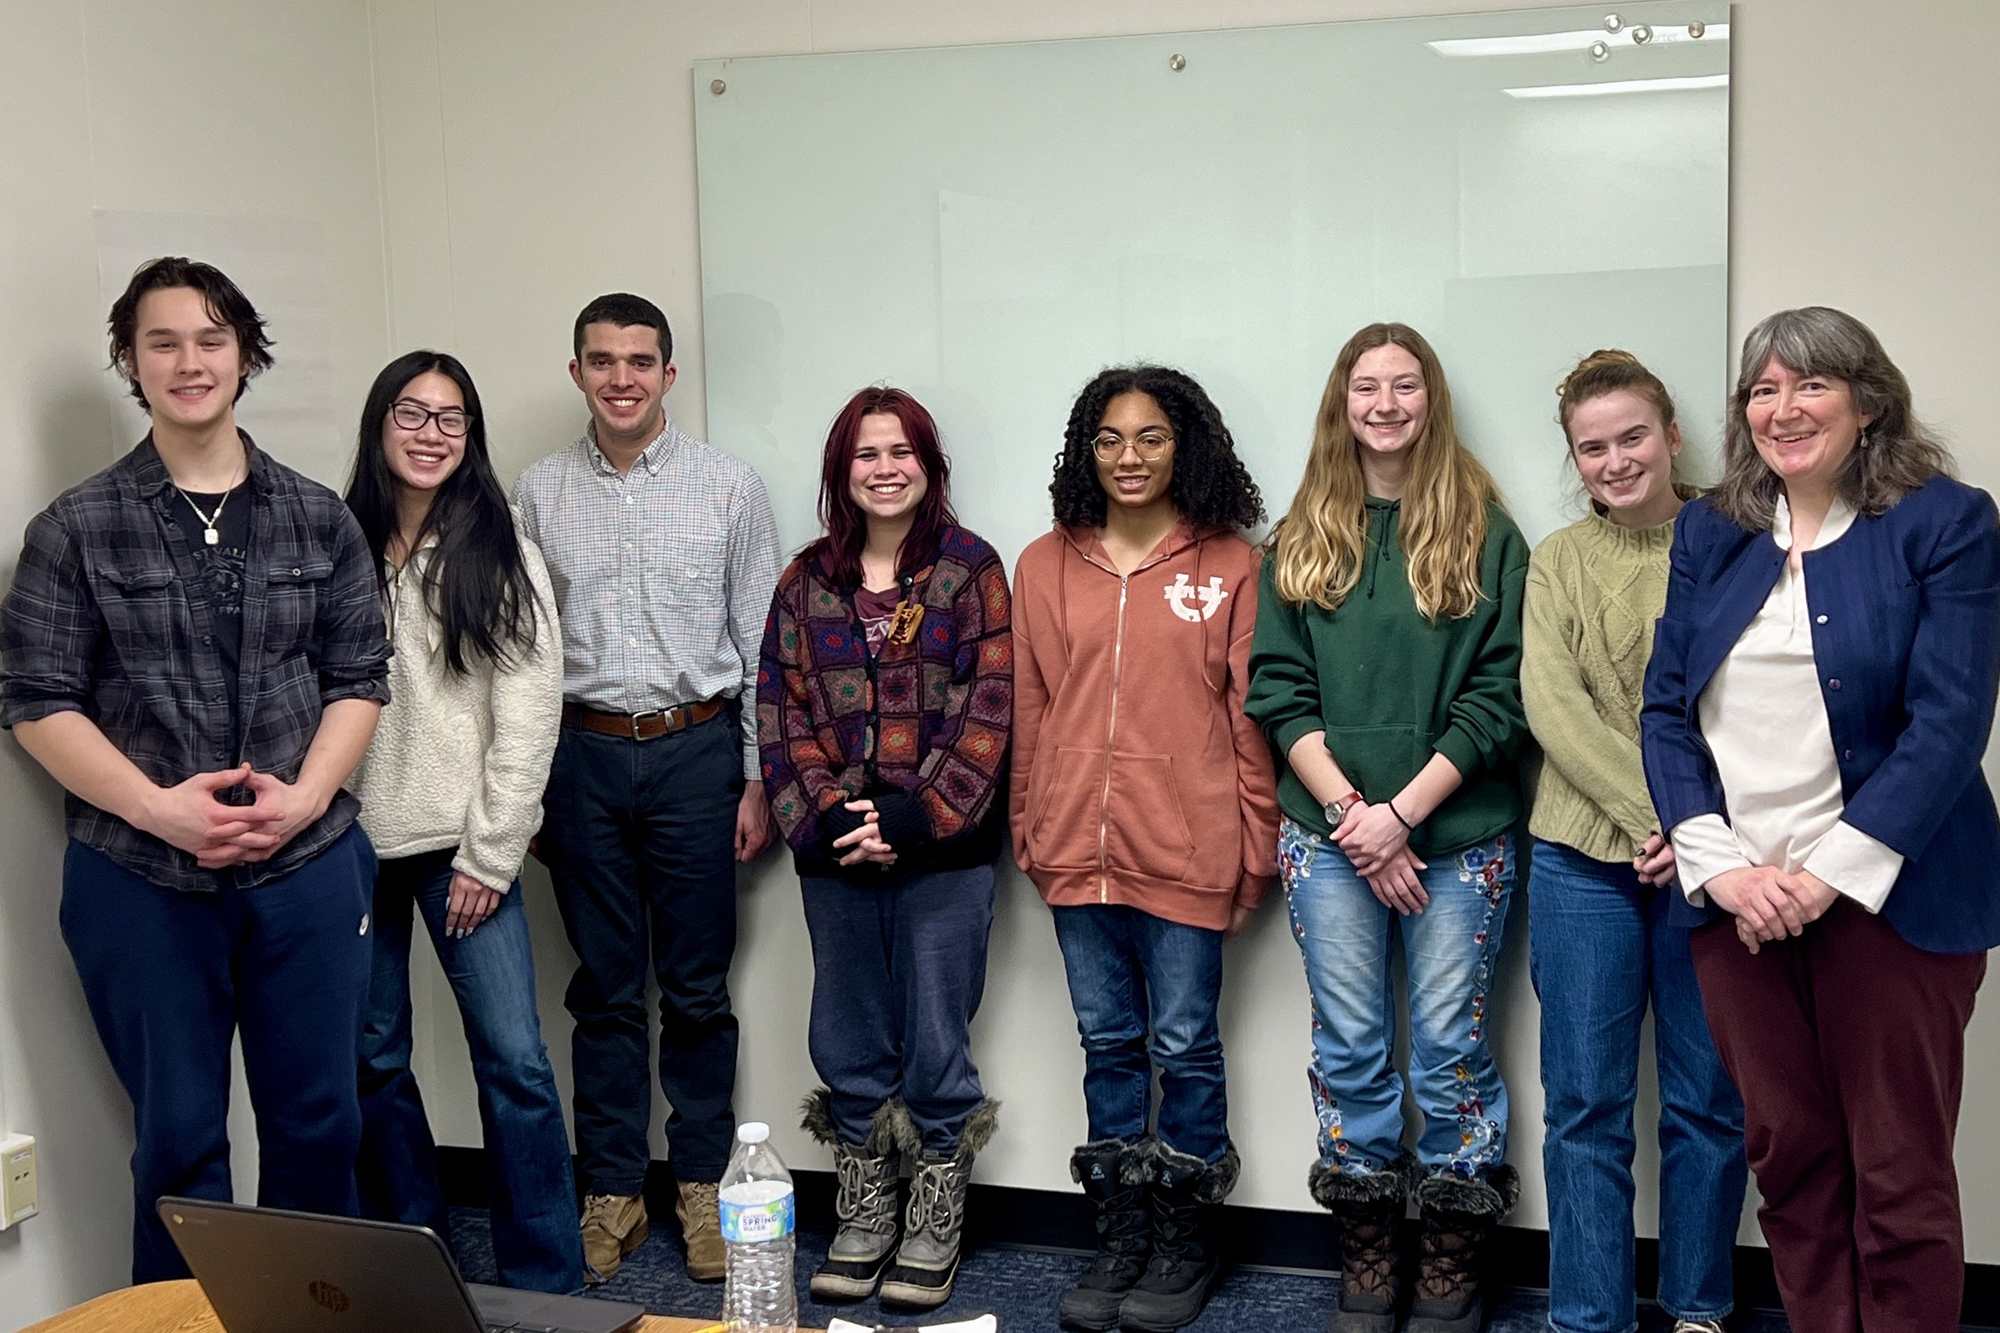 Pre-Law Club meeting attendees. From left to right: Owen Adams, Zoe Schneider, Rob Ziegler, Maria Arnett, Zandeleigh Silva, Ivy Daly, Matia Wartes, and Carol Gray. UAF Photo by Amy Lovecraft.